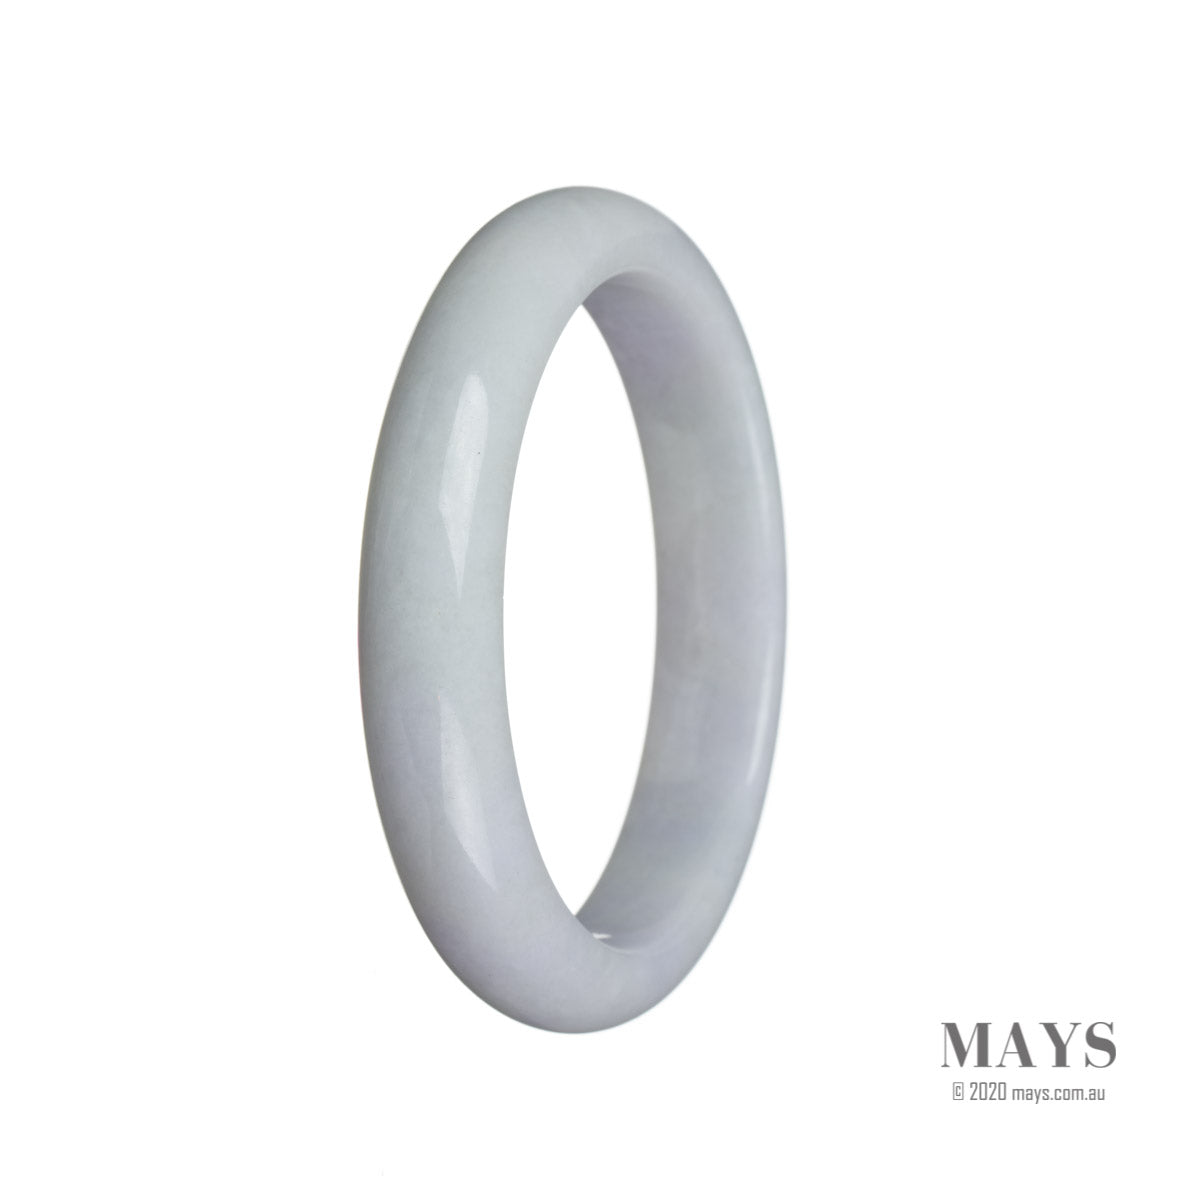 A beautiful genuine jade bracelet featuring Grade A White with pale lavender Burma jade. The bracelet is 60mm in size and has a semi-round shape. Designed by MAYS™.